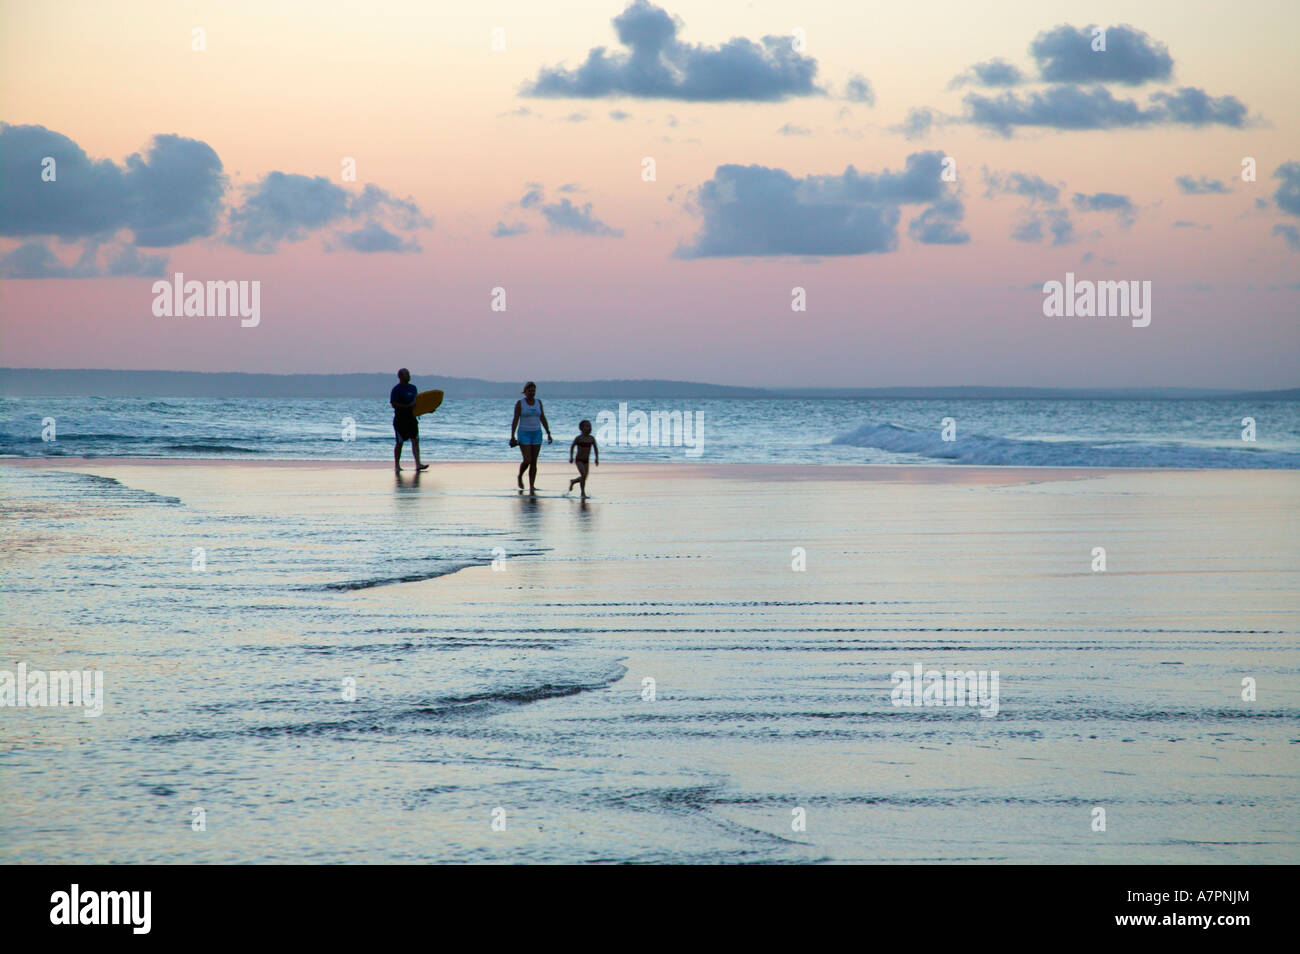 A family walking on the beach in Mozambique coast at dusk Barra Mozambique Stock Photo